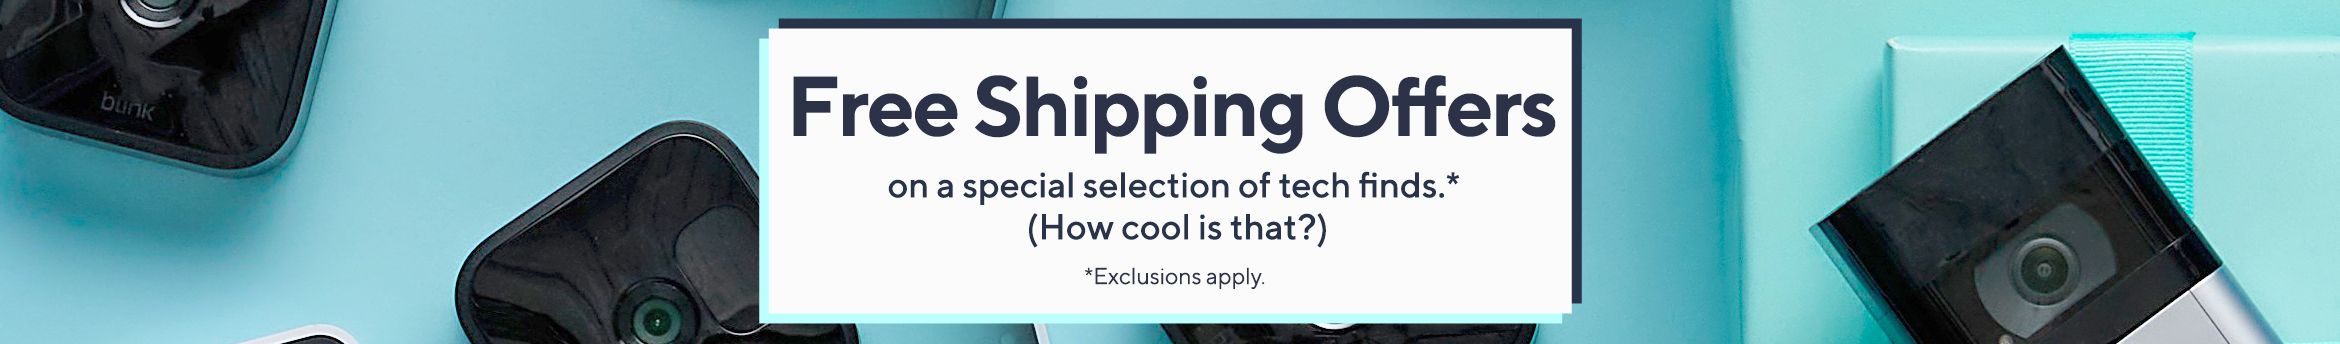 Free Shipping Offers on a special selection of tech finds.* (How cool is that?) *Exclusions apply.